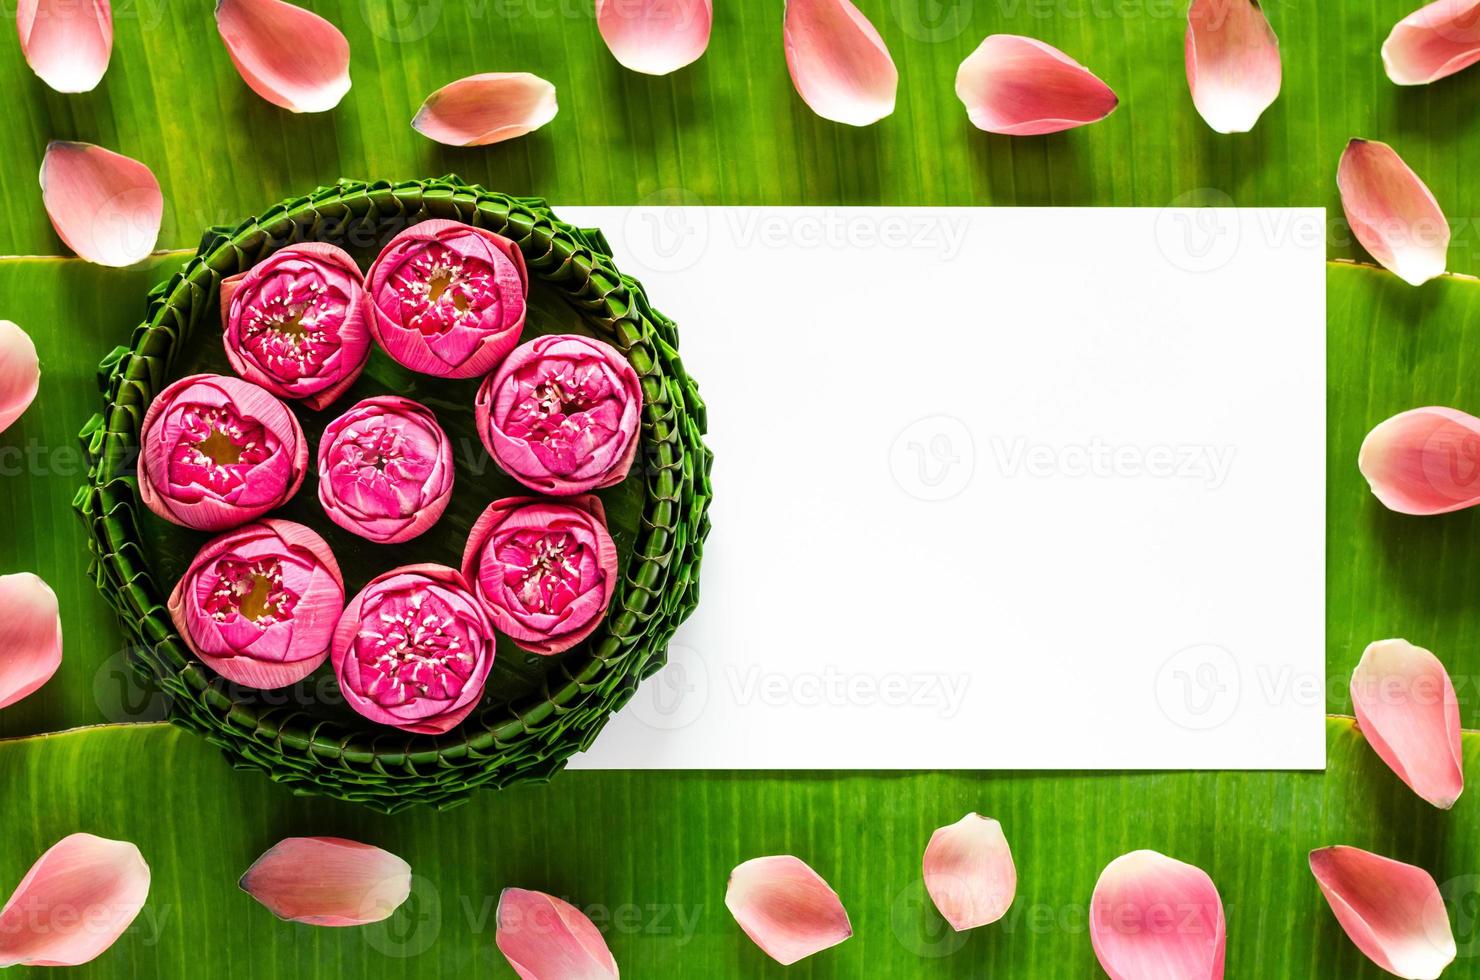 Banana leaf Krathong for Thailand Full moon or Loy Krathong festival with space for text on banana leaves and lotus petals background. photo